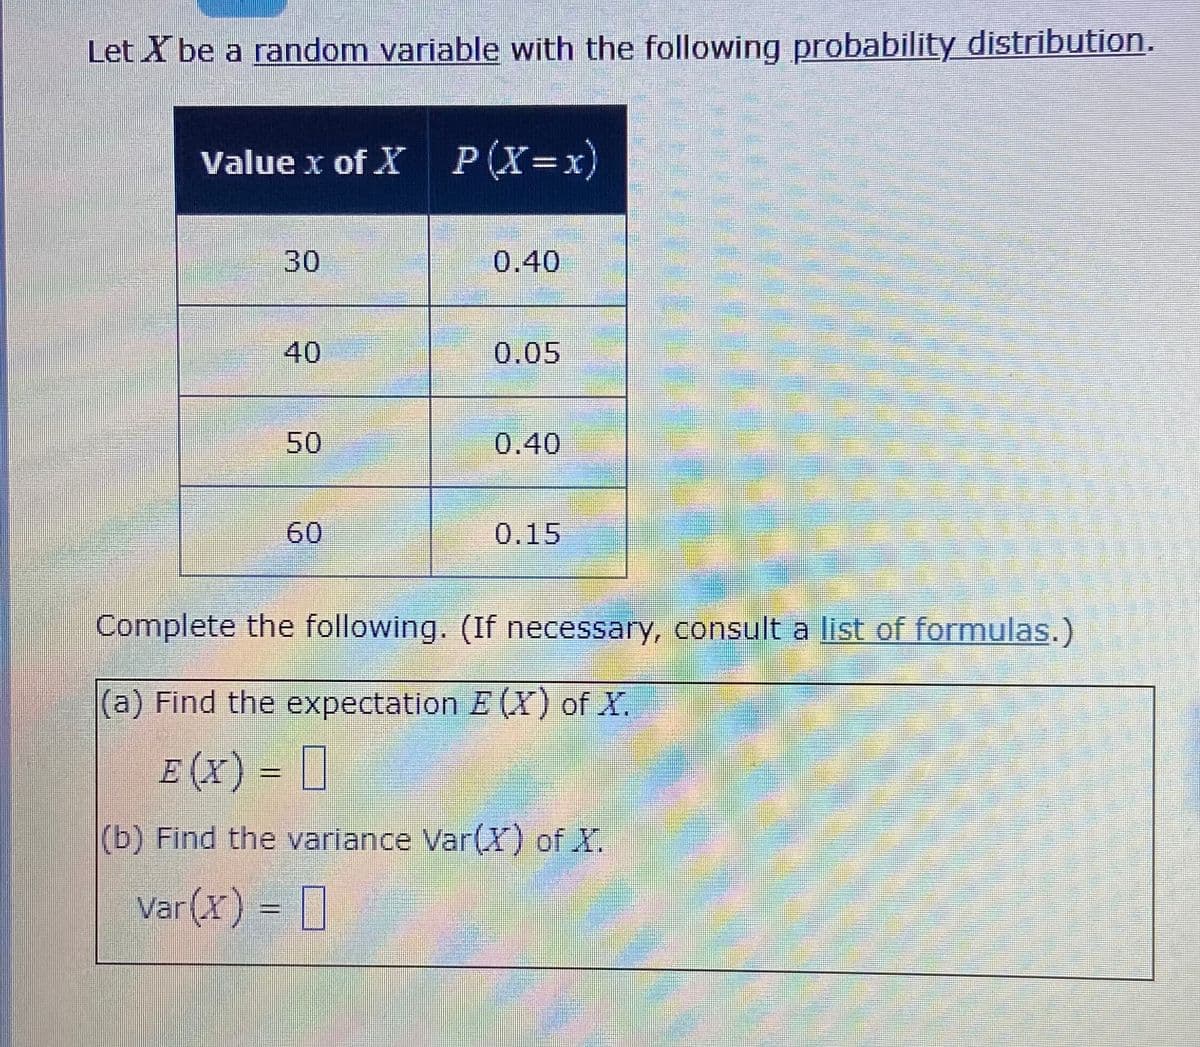 Let X be a random variable with the following probability distribution.
Value x of X P(X=x)
30
0.40
40
0.05
50
0.40
60
0.15
Complete the following. (If necessary, consult a list of formulas.)
|(a) Find the expectation E (X) of X.
E (x) = D
(b) Find the variance Var(X) of X.
Var (X) = ]
%3D
